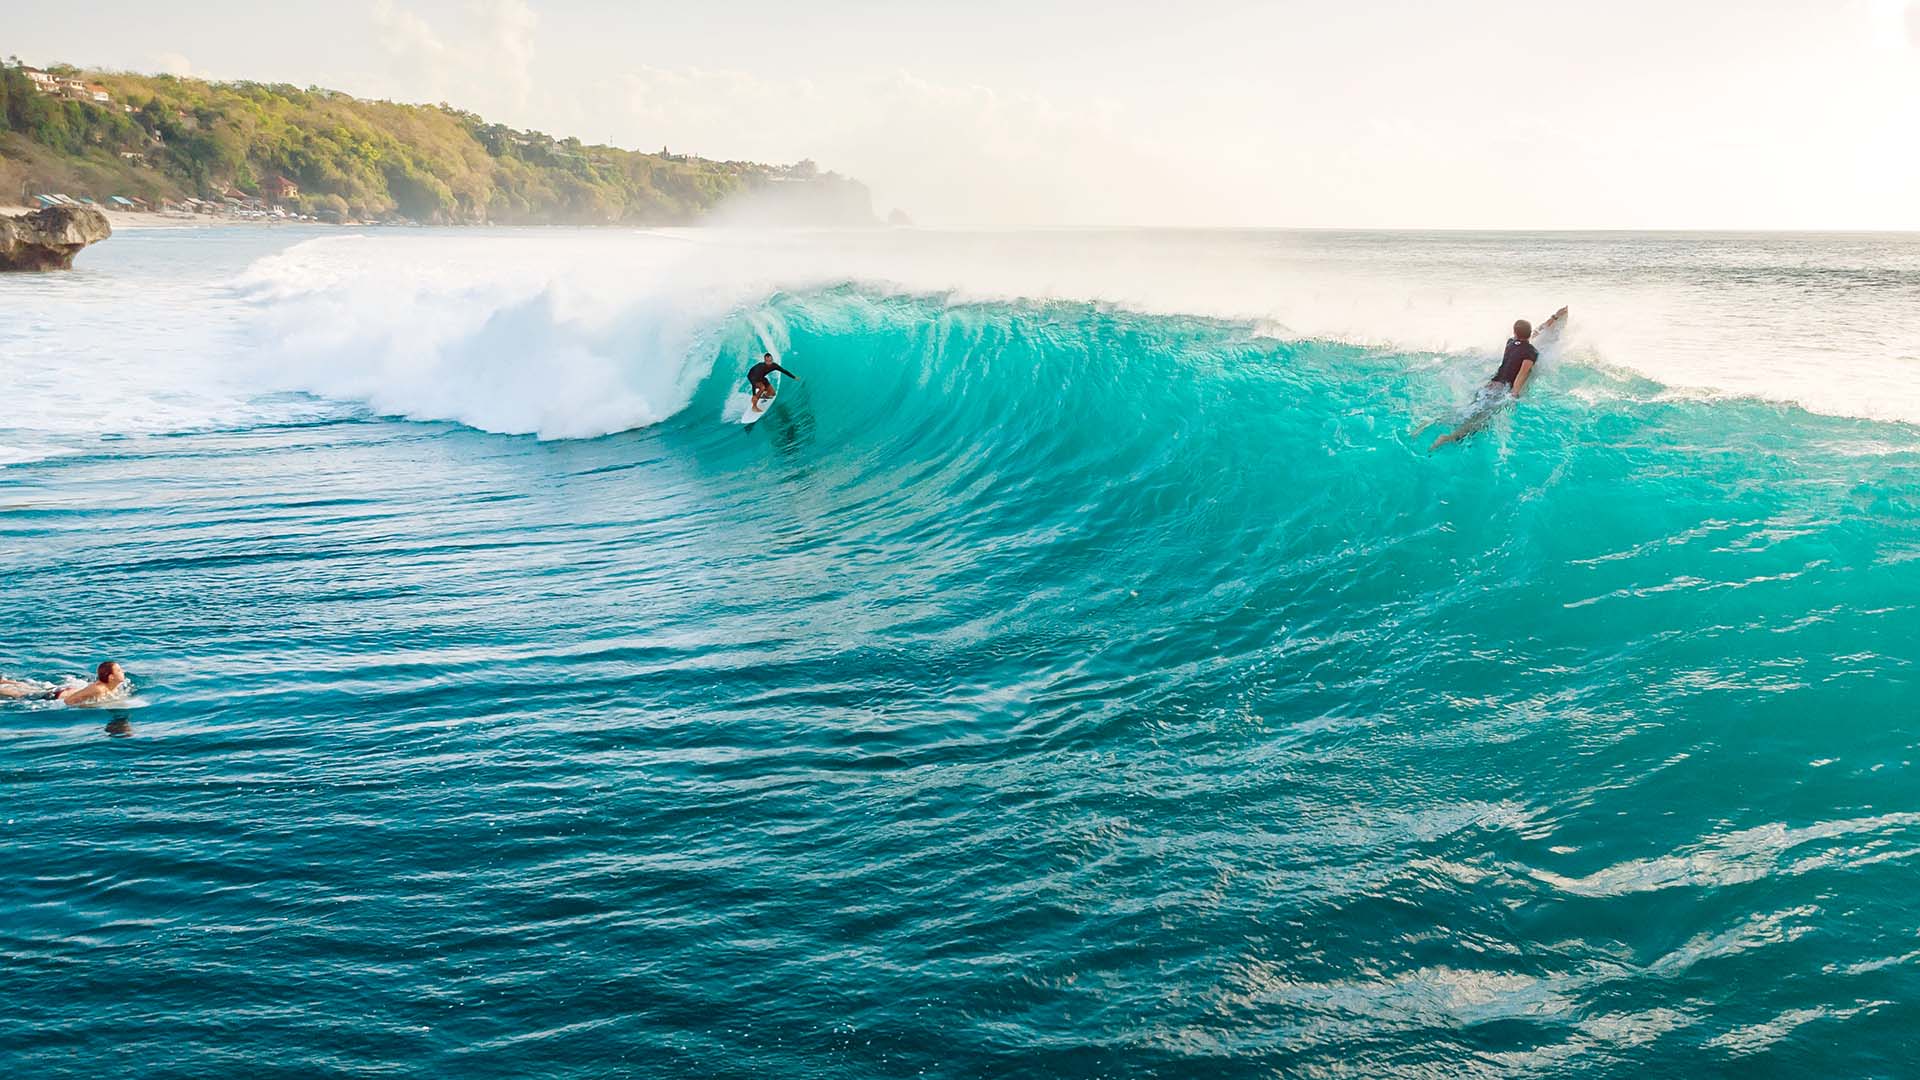 A wide shot of surfers riding a big wave in Bali.